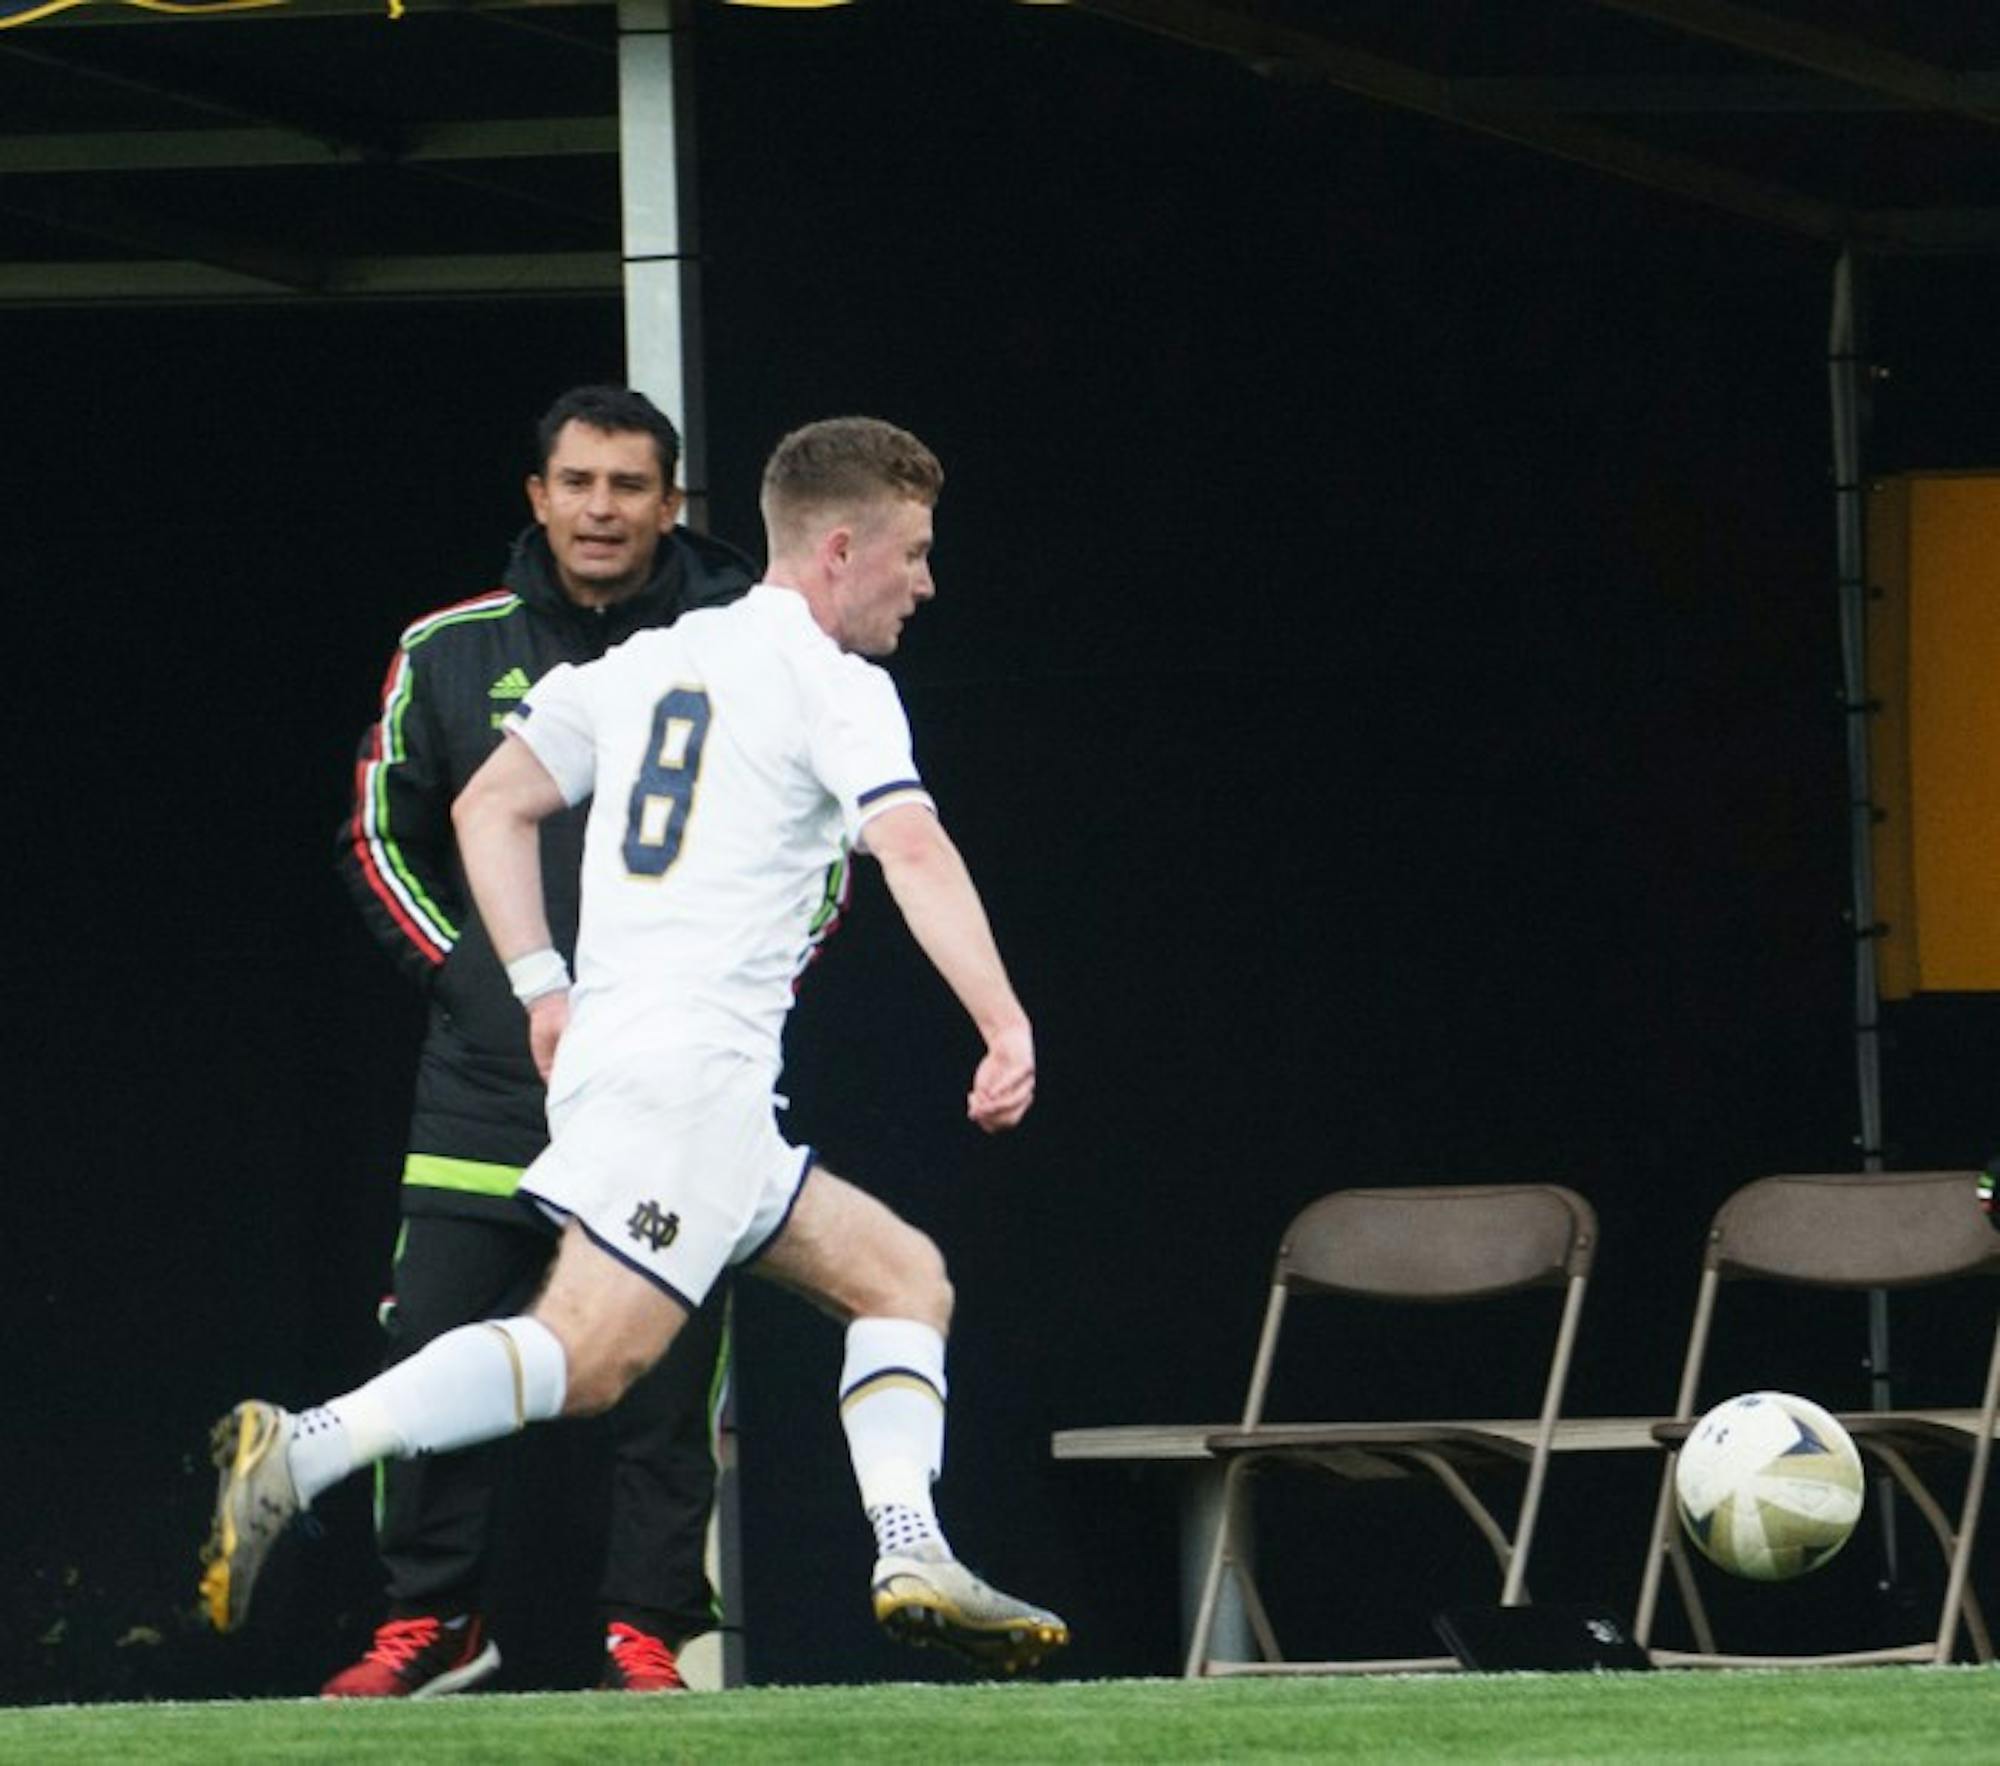 Irish senior forward Jon Gallagher tracks down the ball during Notre Dame’s 5-0 victory over the Mexico U-18s on April 28 at Alumni Stadium. Gallagher led the team in goals and assists last season.